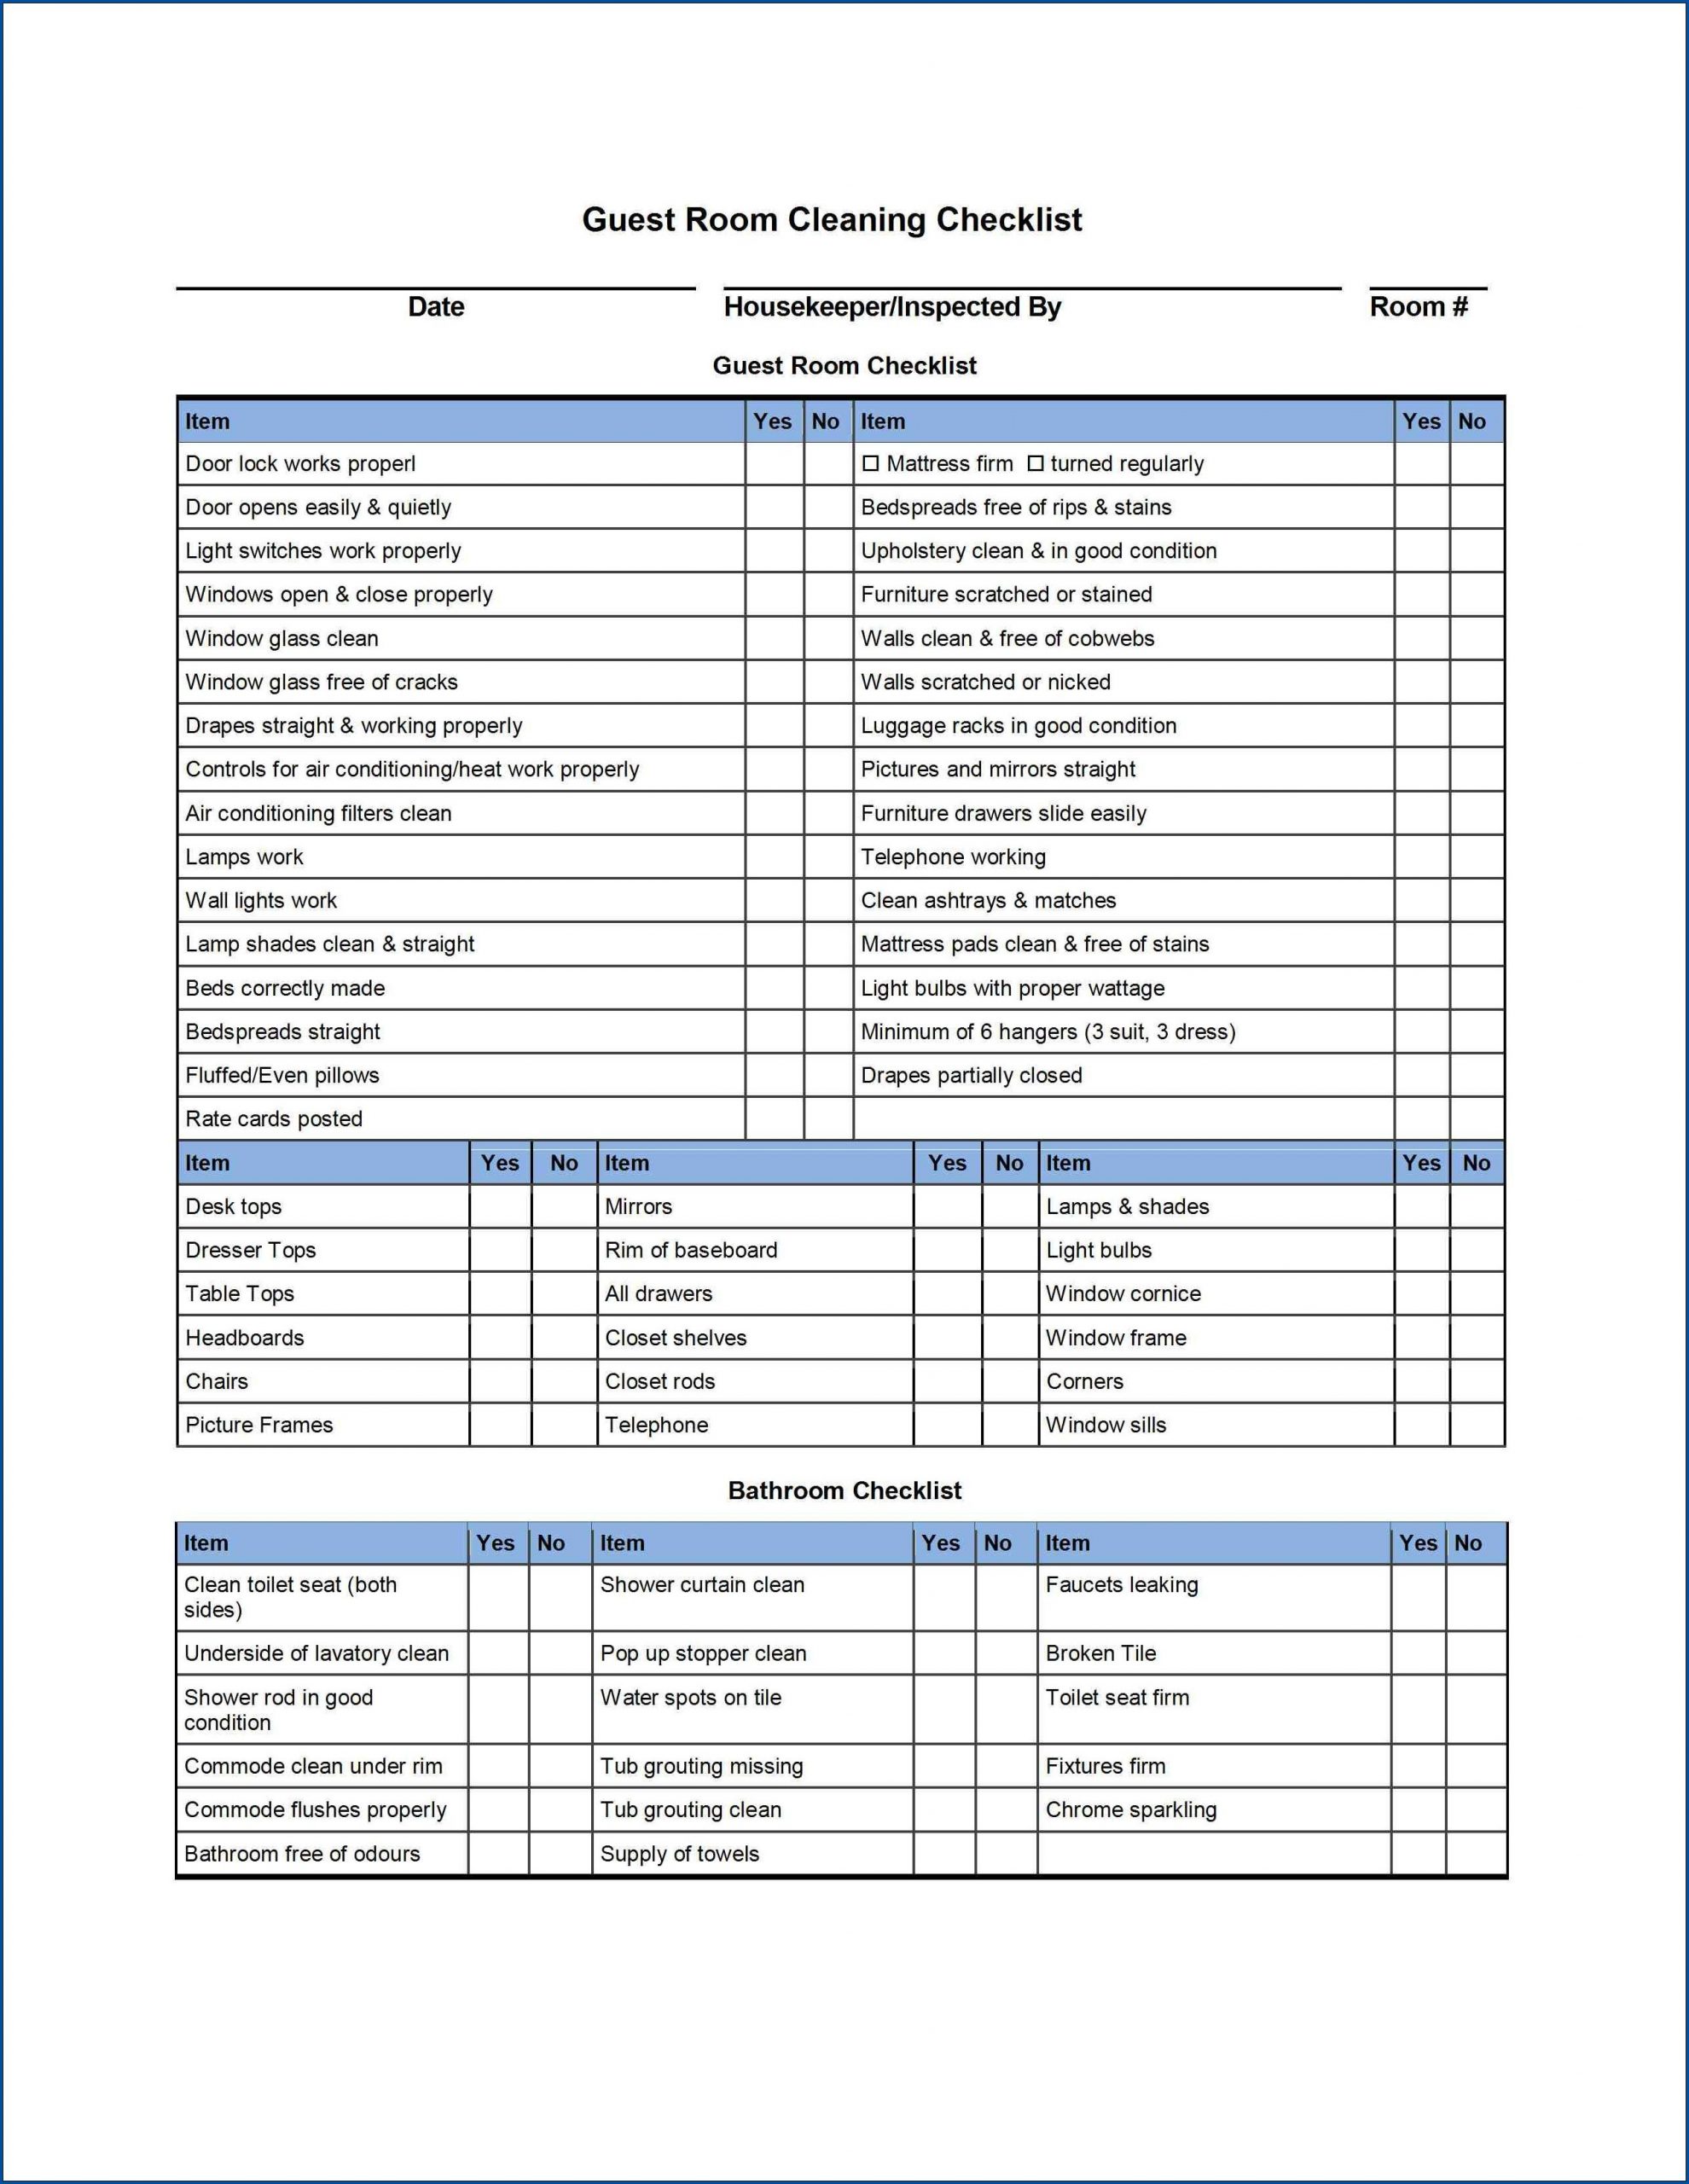 Example of Room Cleaning Checklist Template